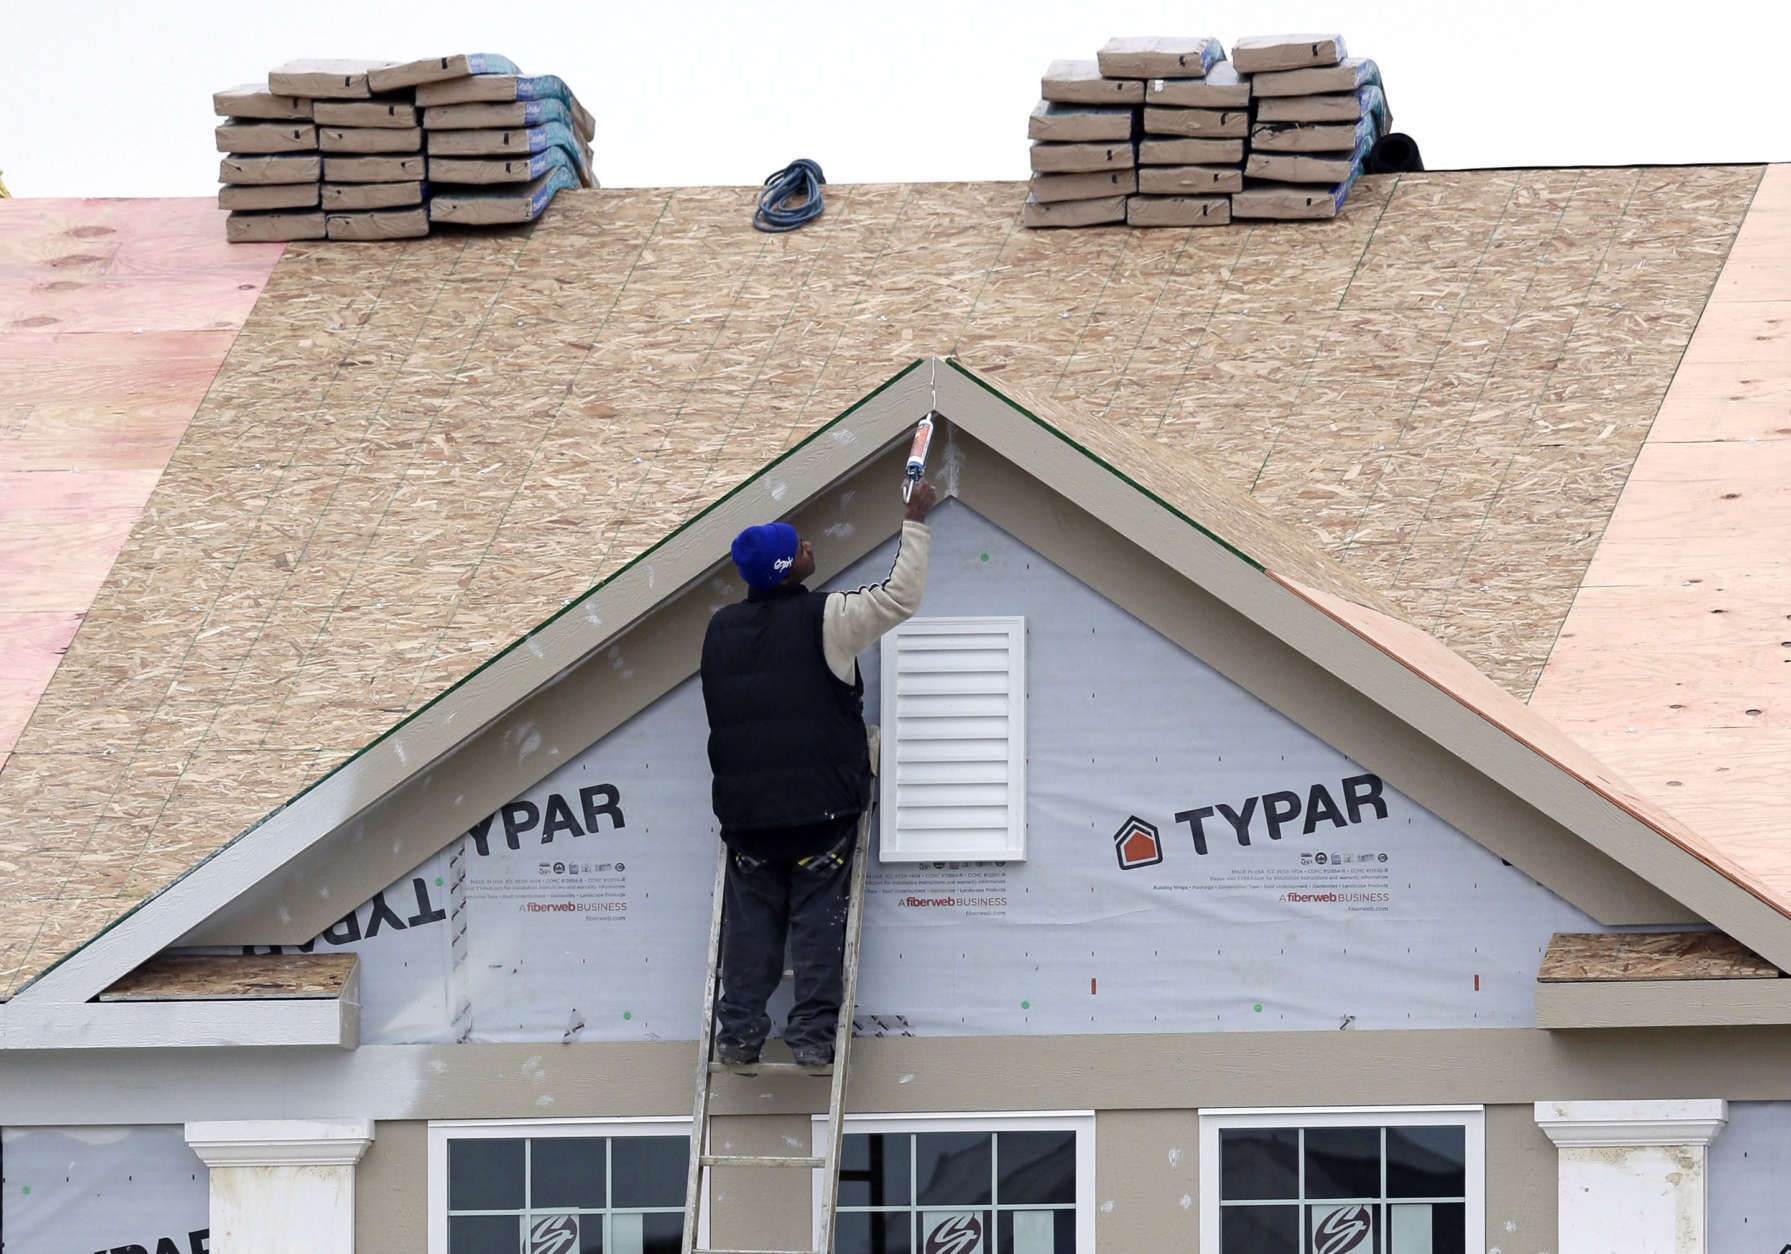 In this Monday, Nov. 11, 2013 photo, a worker caulks the peak of a new condominium complex under construction in Pepper Pike, Ohio. The Commerce Department releases new home sales for November on Tuesday, Dec. 24, 2013. (AP Photo/Tony Dejak)